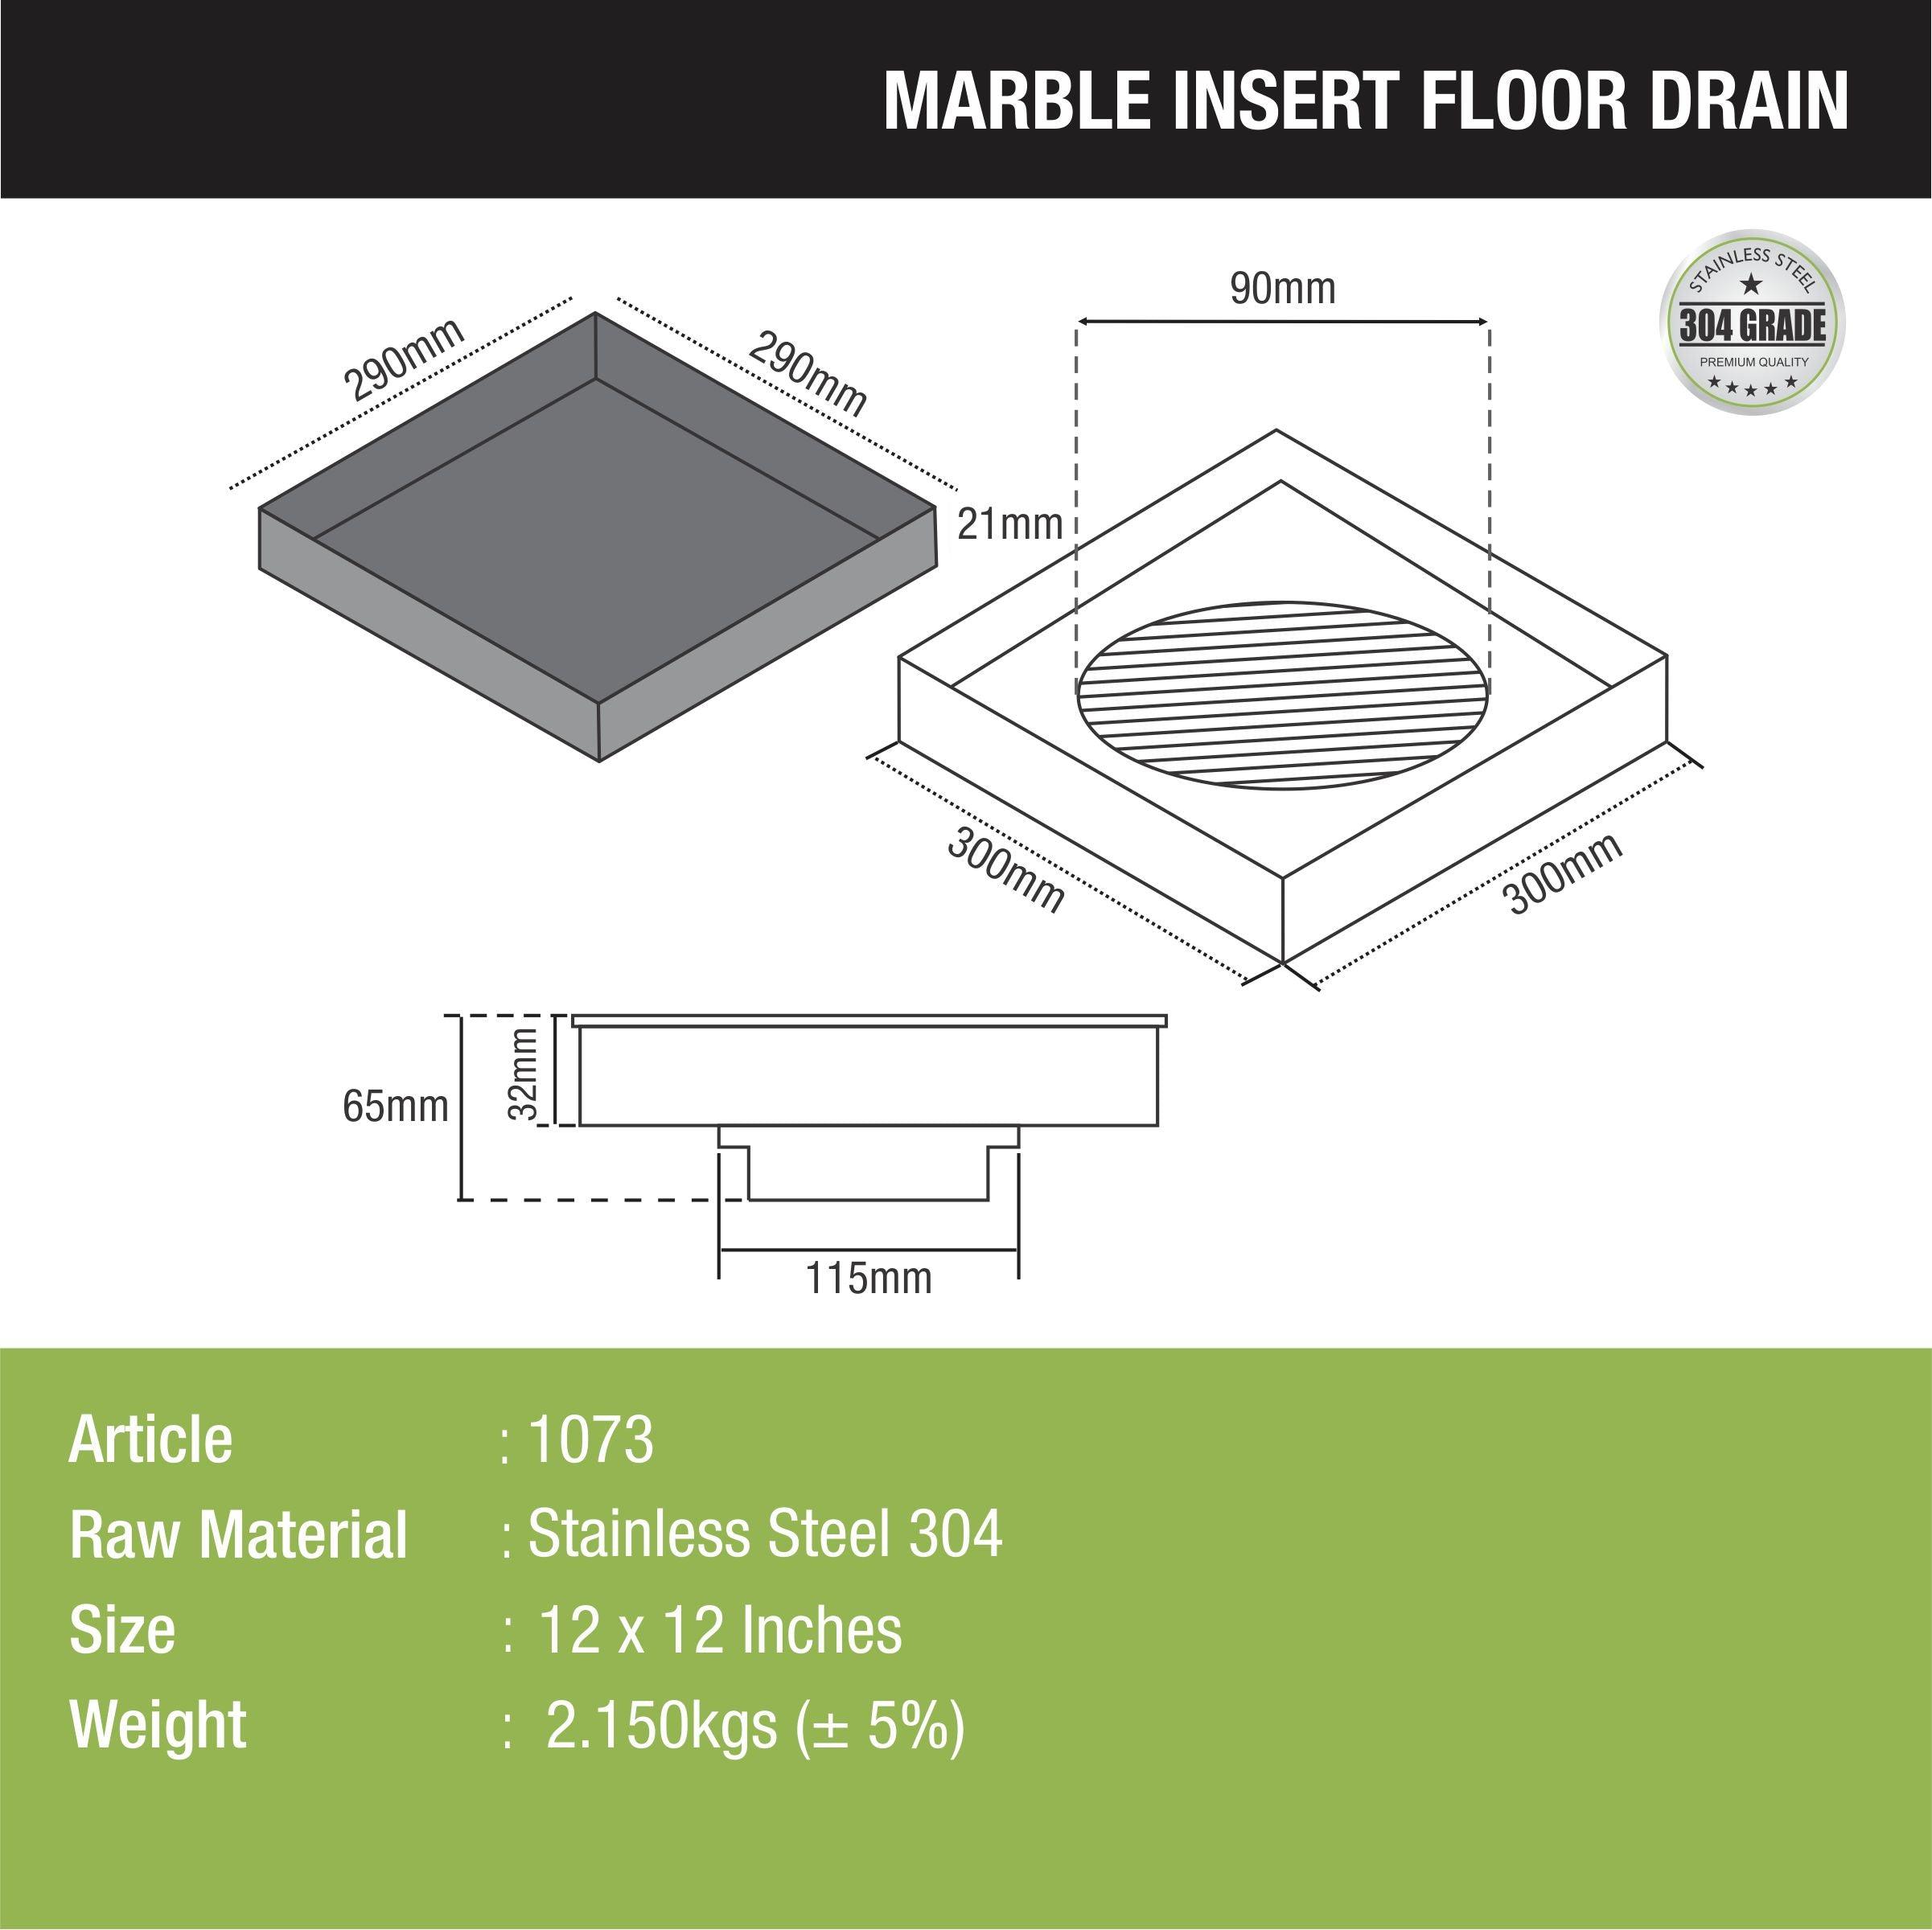 Marble Insert Floor Drain (12 x 12 Inches) dimensions and sizes